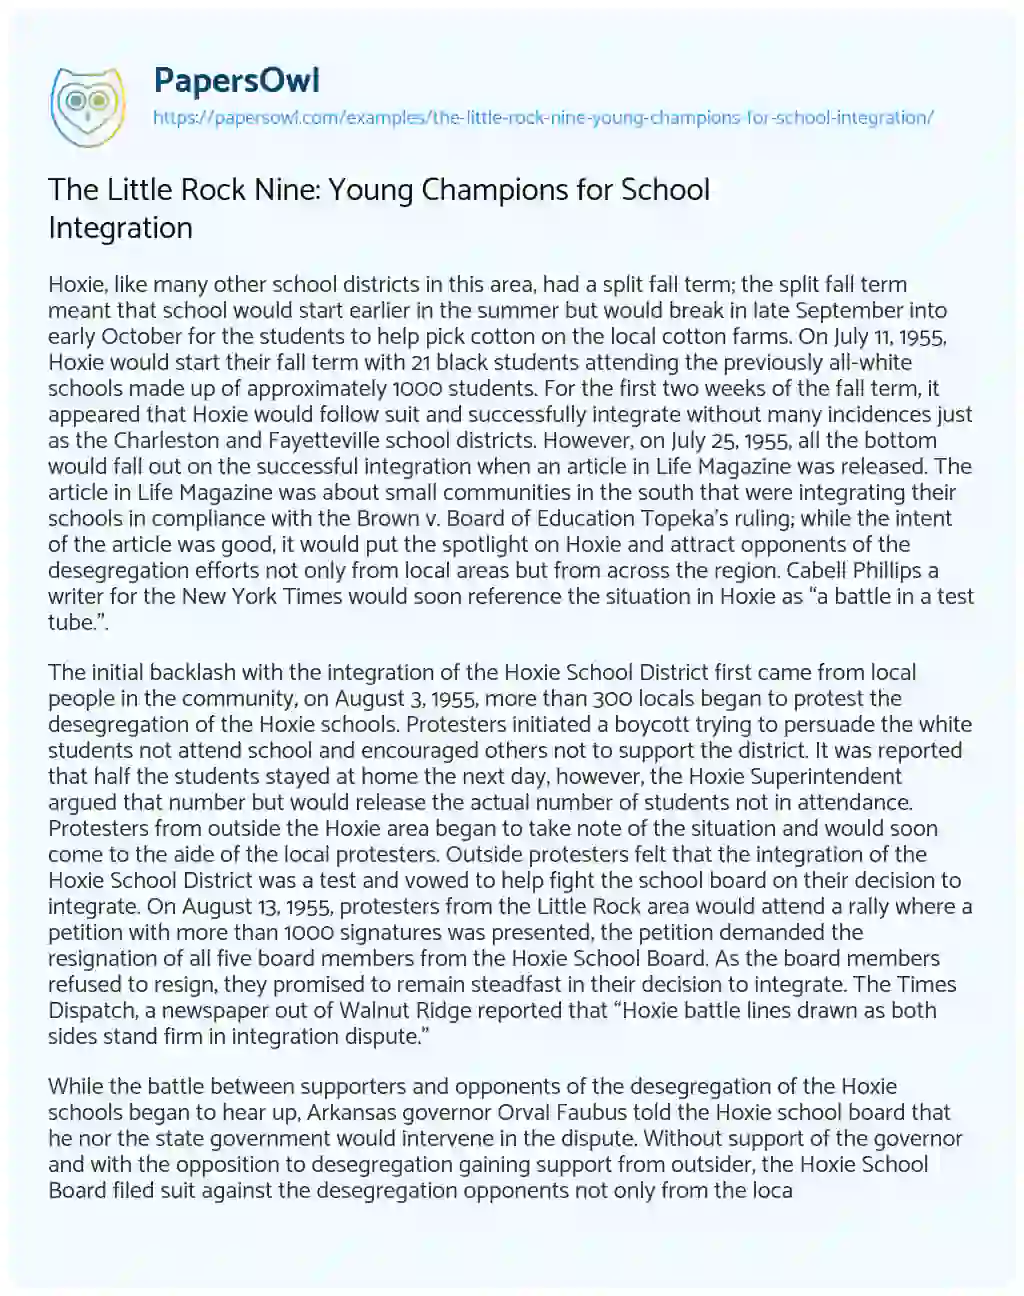 Essay on The Little Rock Nine: Young Champions for School Integration